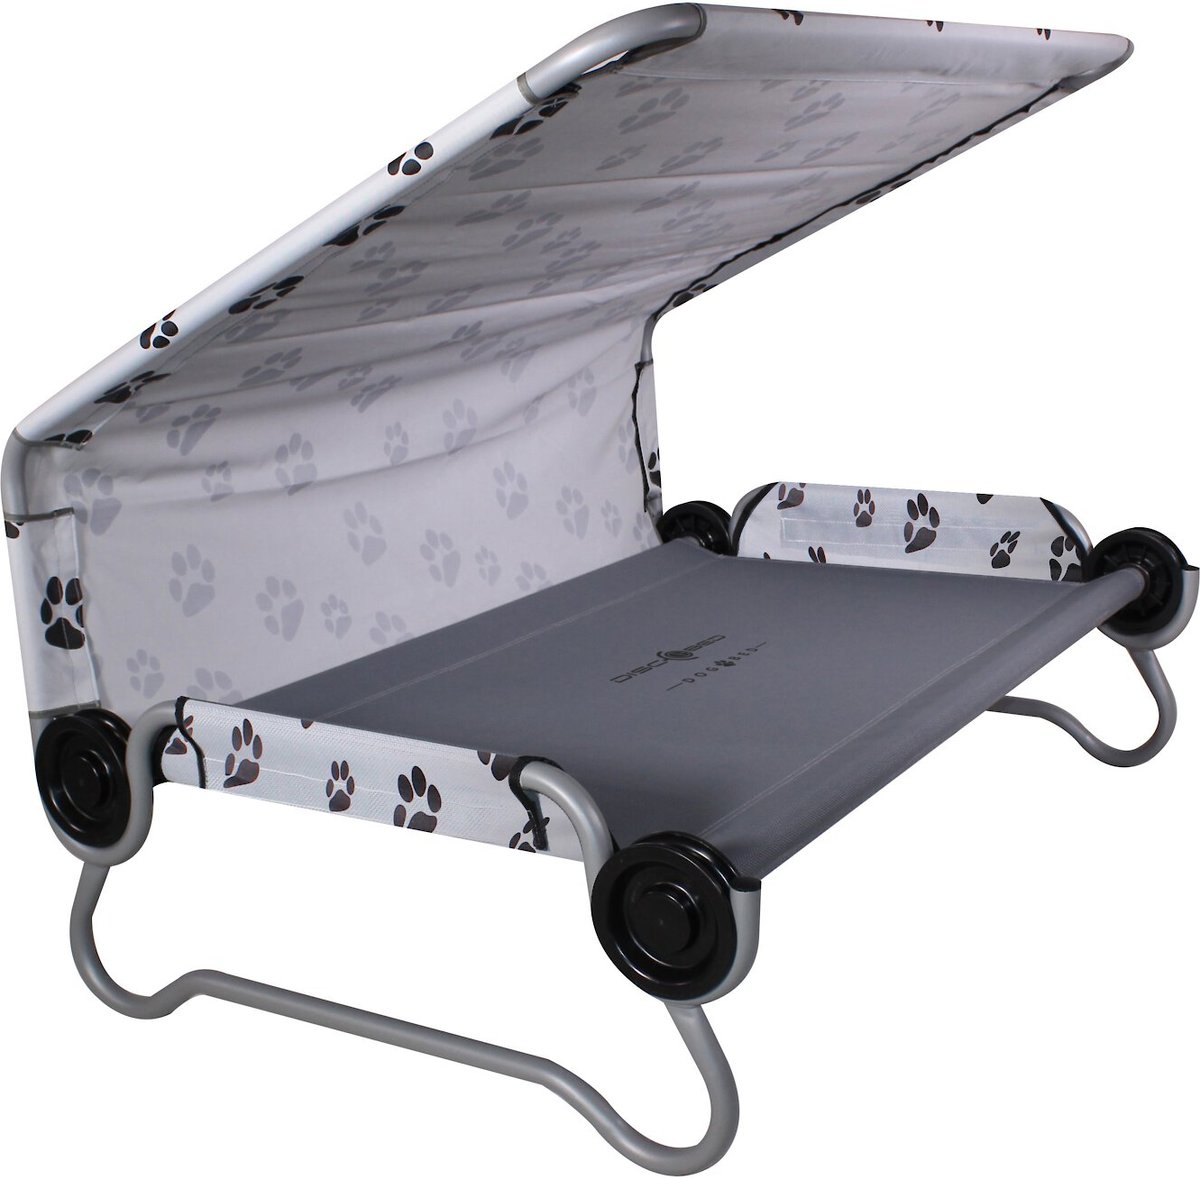 Disc-O-Bed Elevated Covered Dog Bed